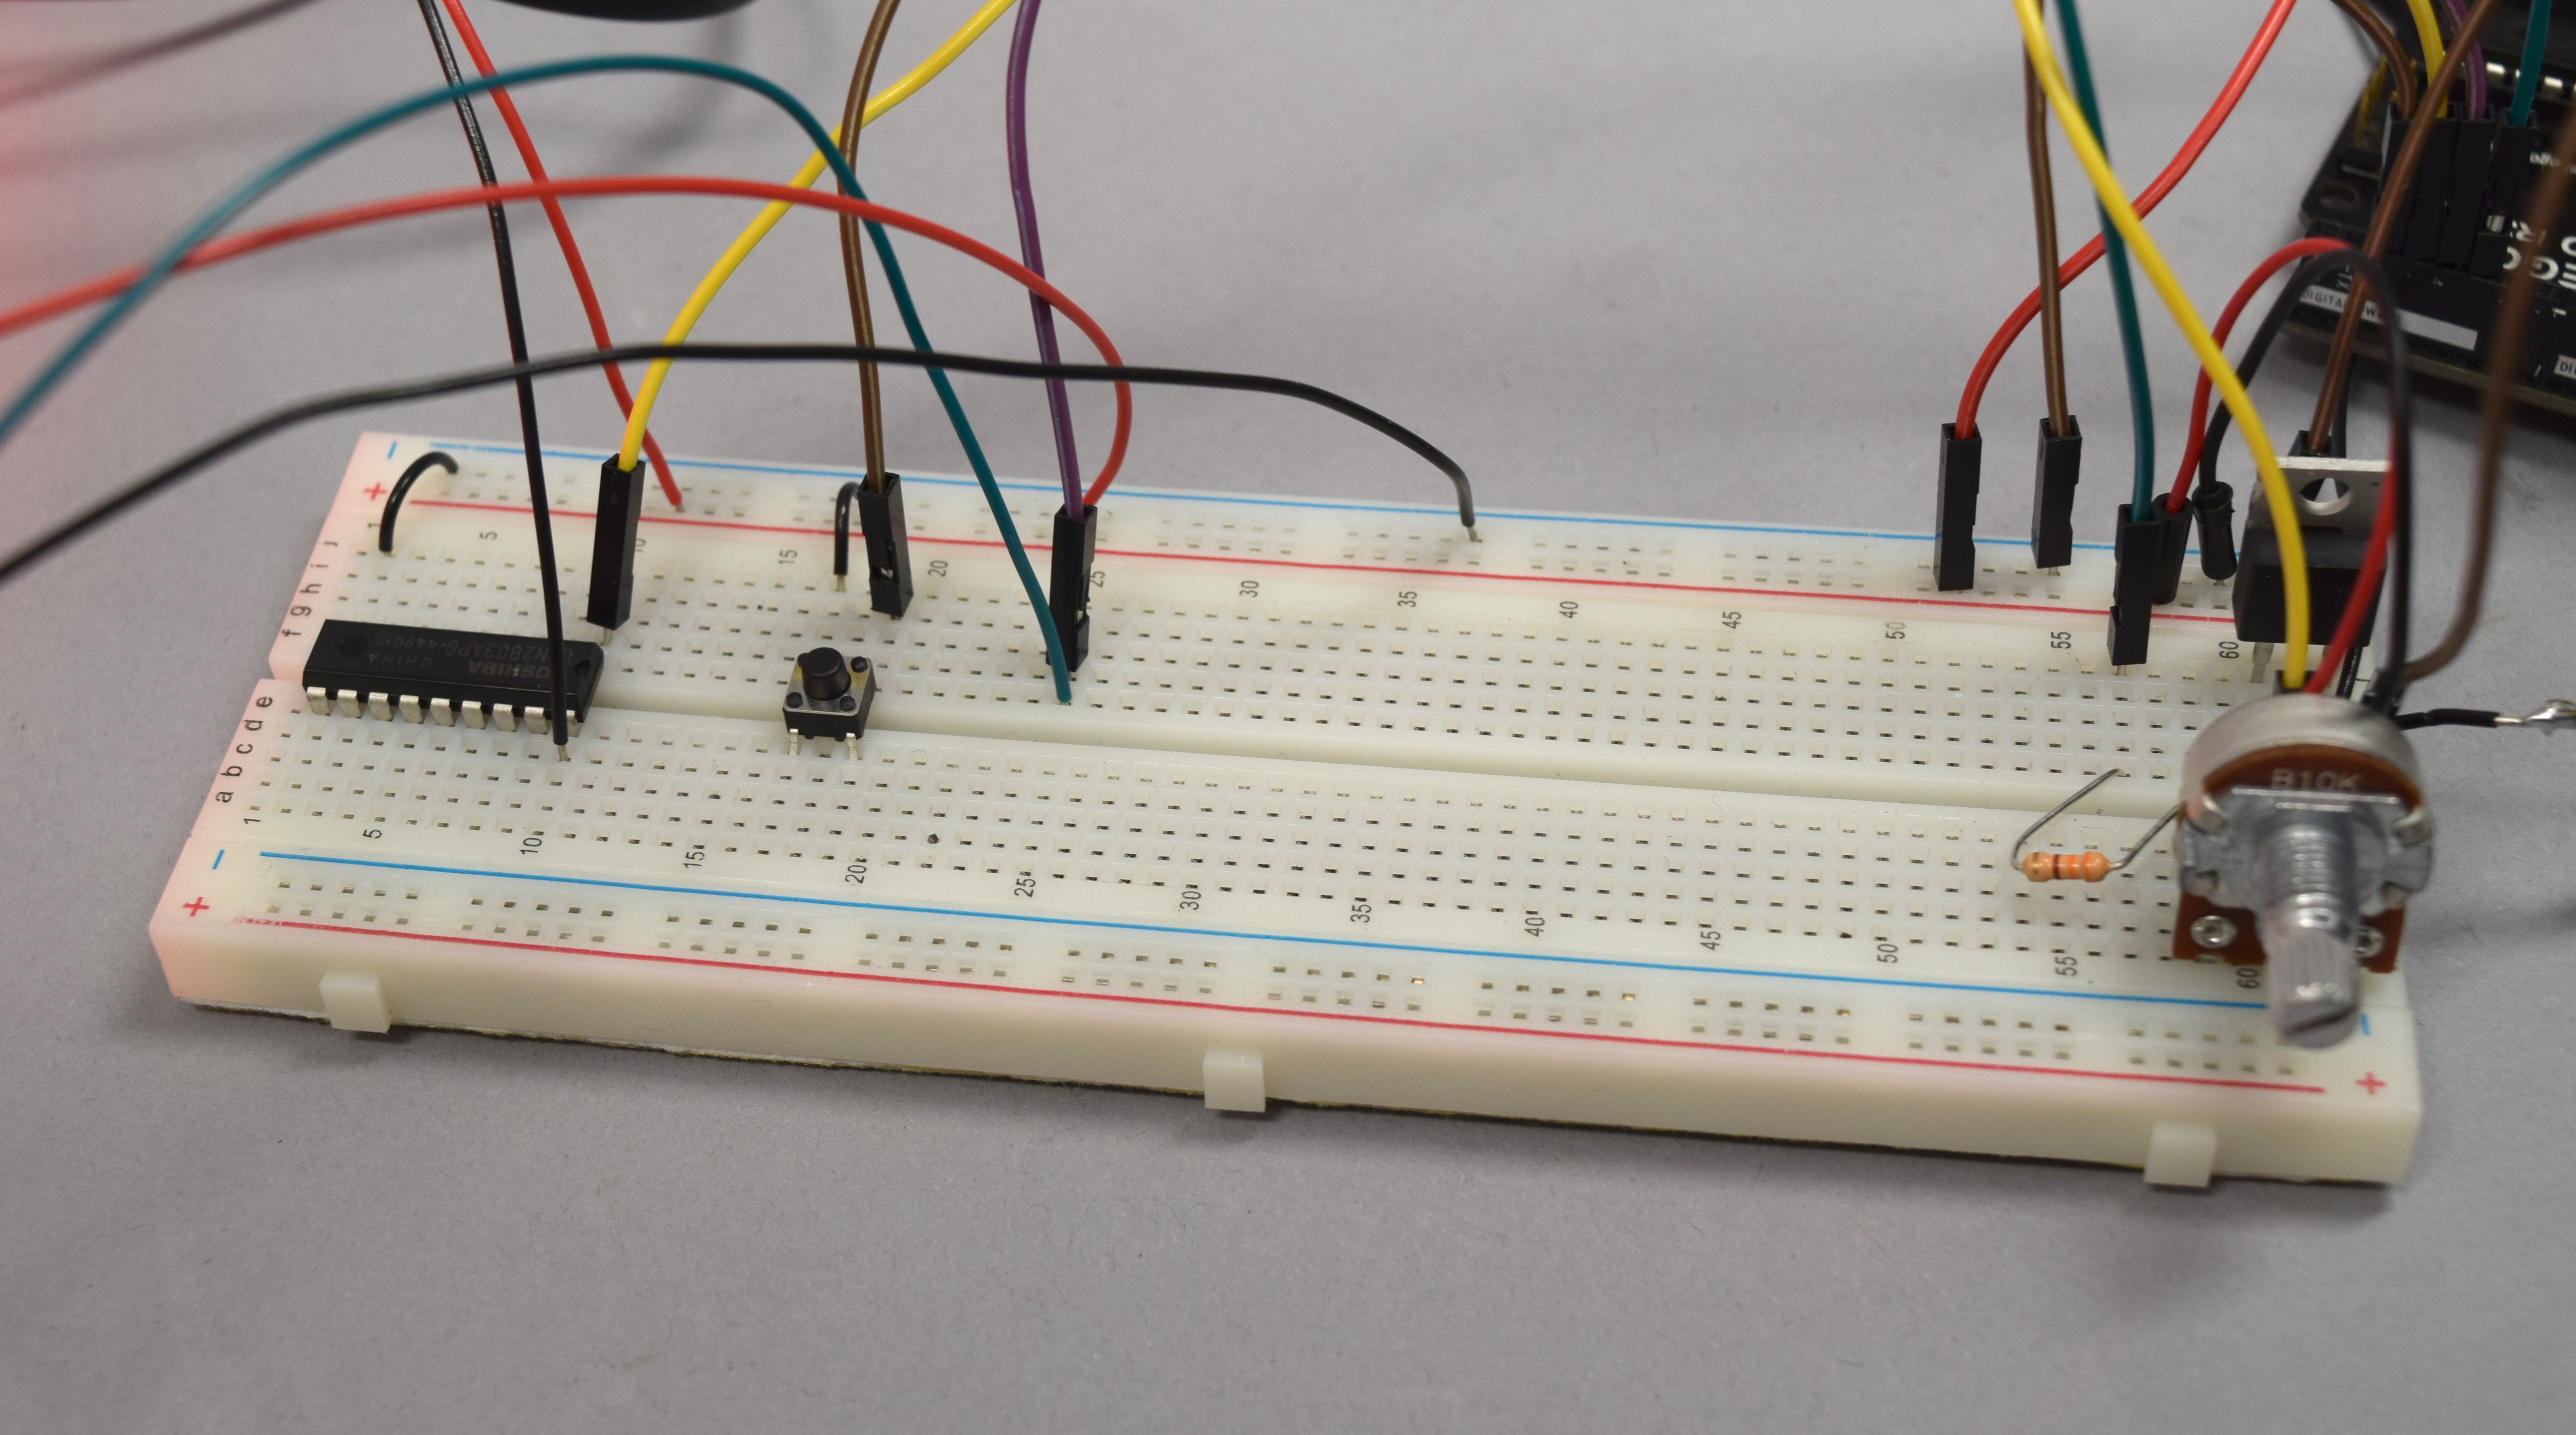 Breadboard that has a button to manually turn on the humidifier and a potentiometer that adjust the pump level